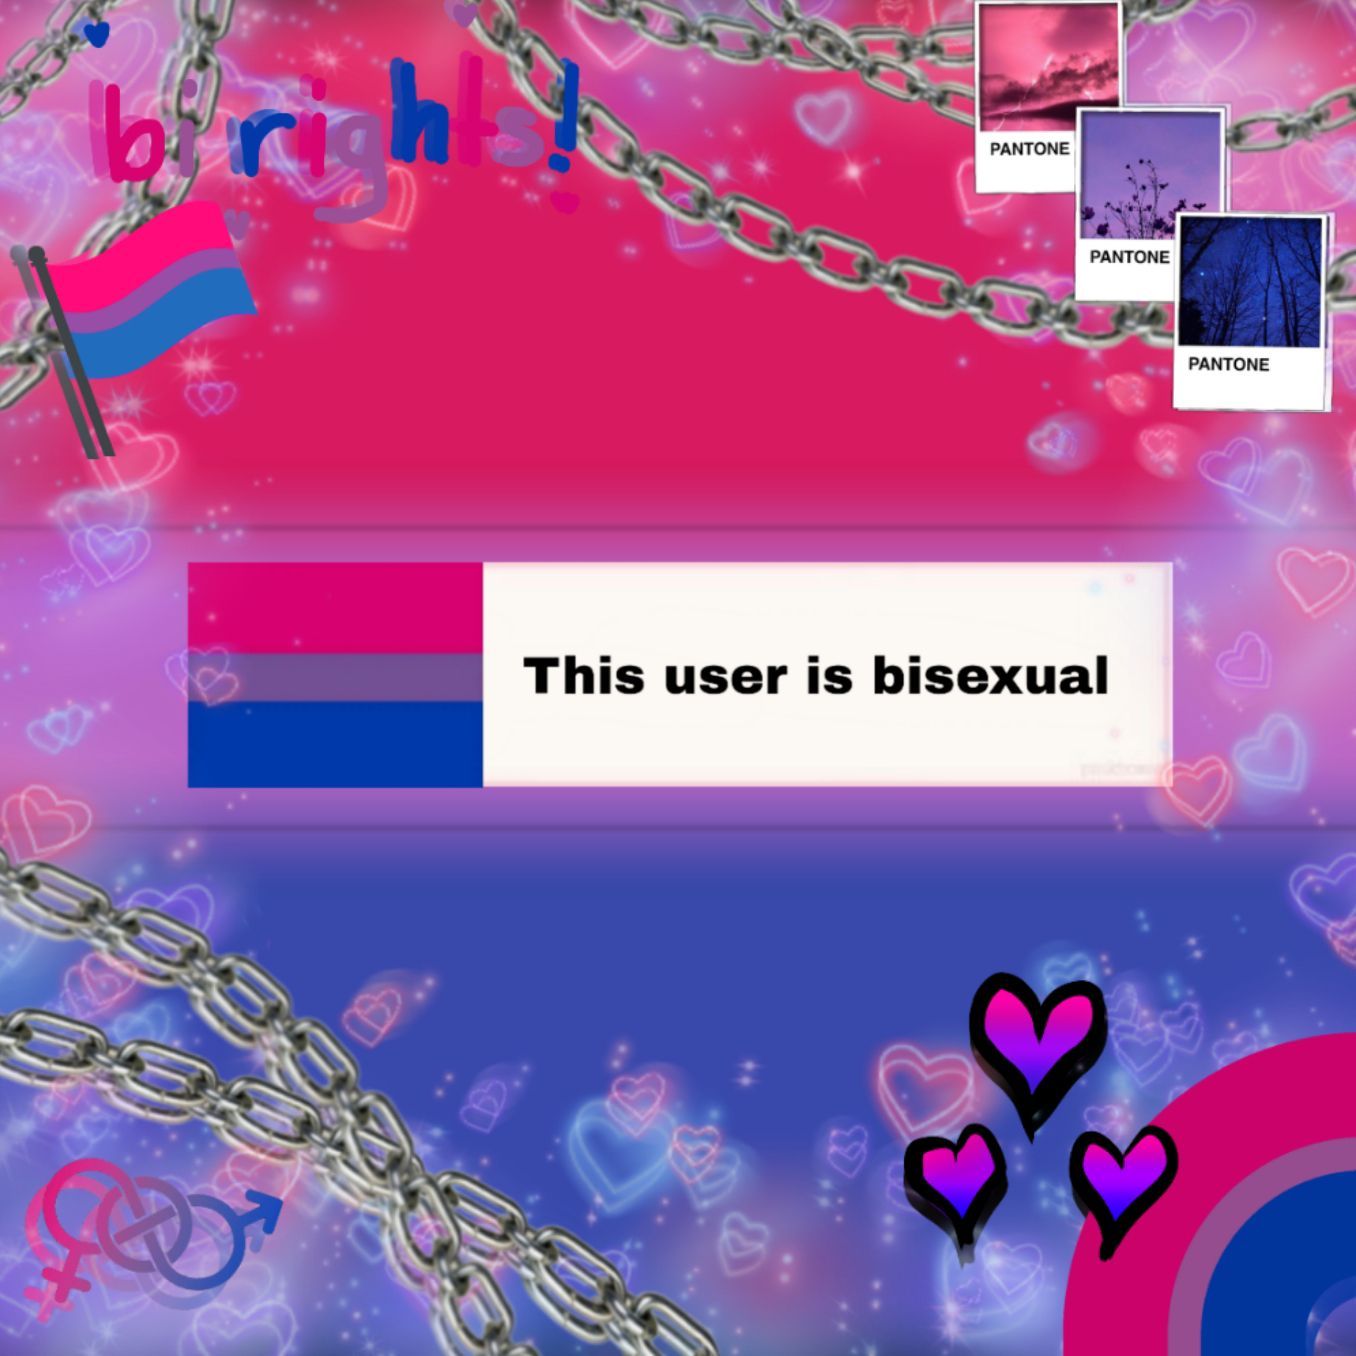 This user is bisexual - Bisexual